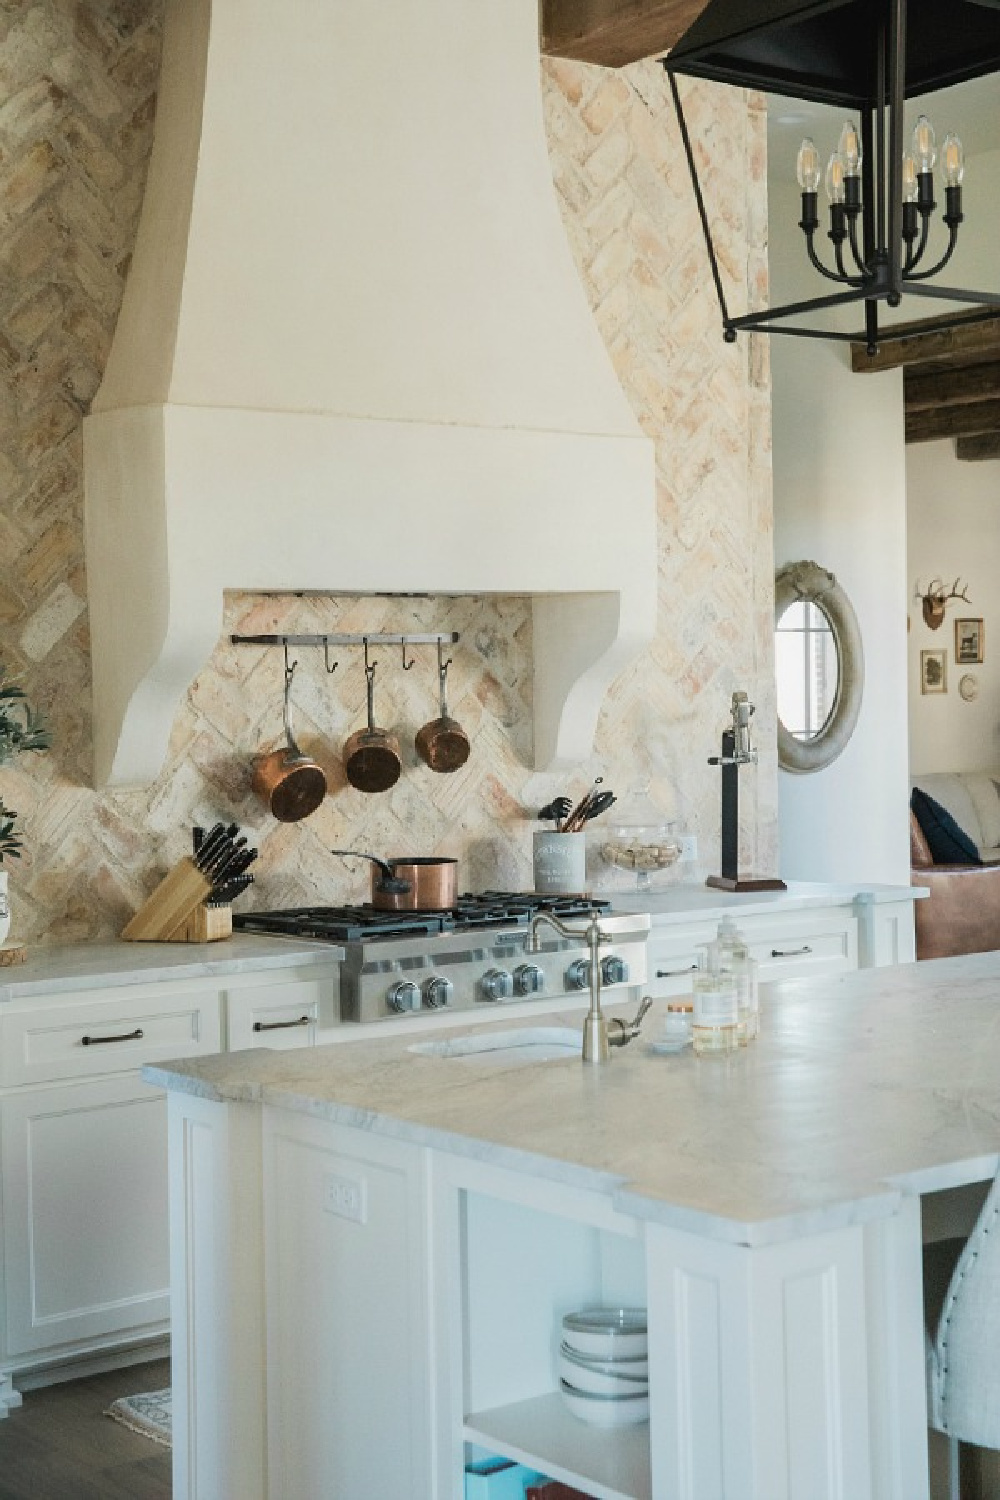 Rustic elegant French country farmhouse kitchen with beautiful stucco range hood, copper pots, reclaimed Chicago brick backsplash, arabescato marble counters, and lanterns over island. Brit Jones Design.